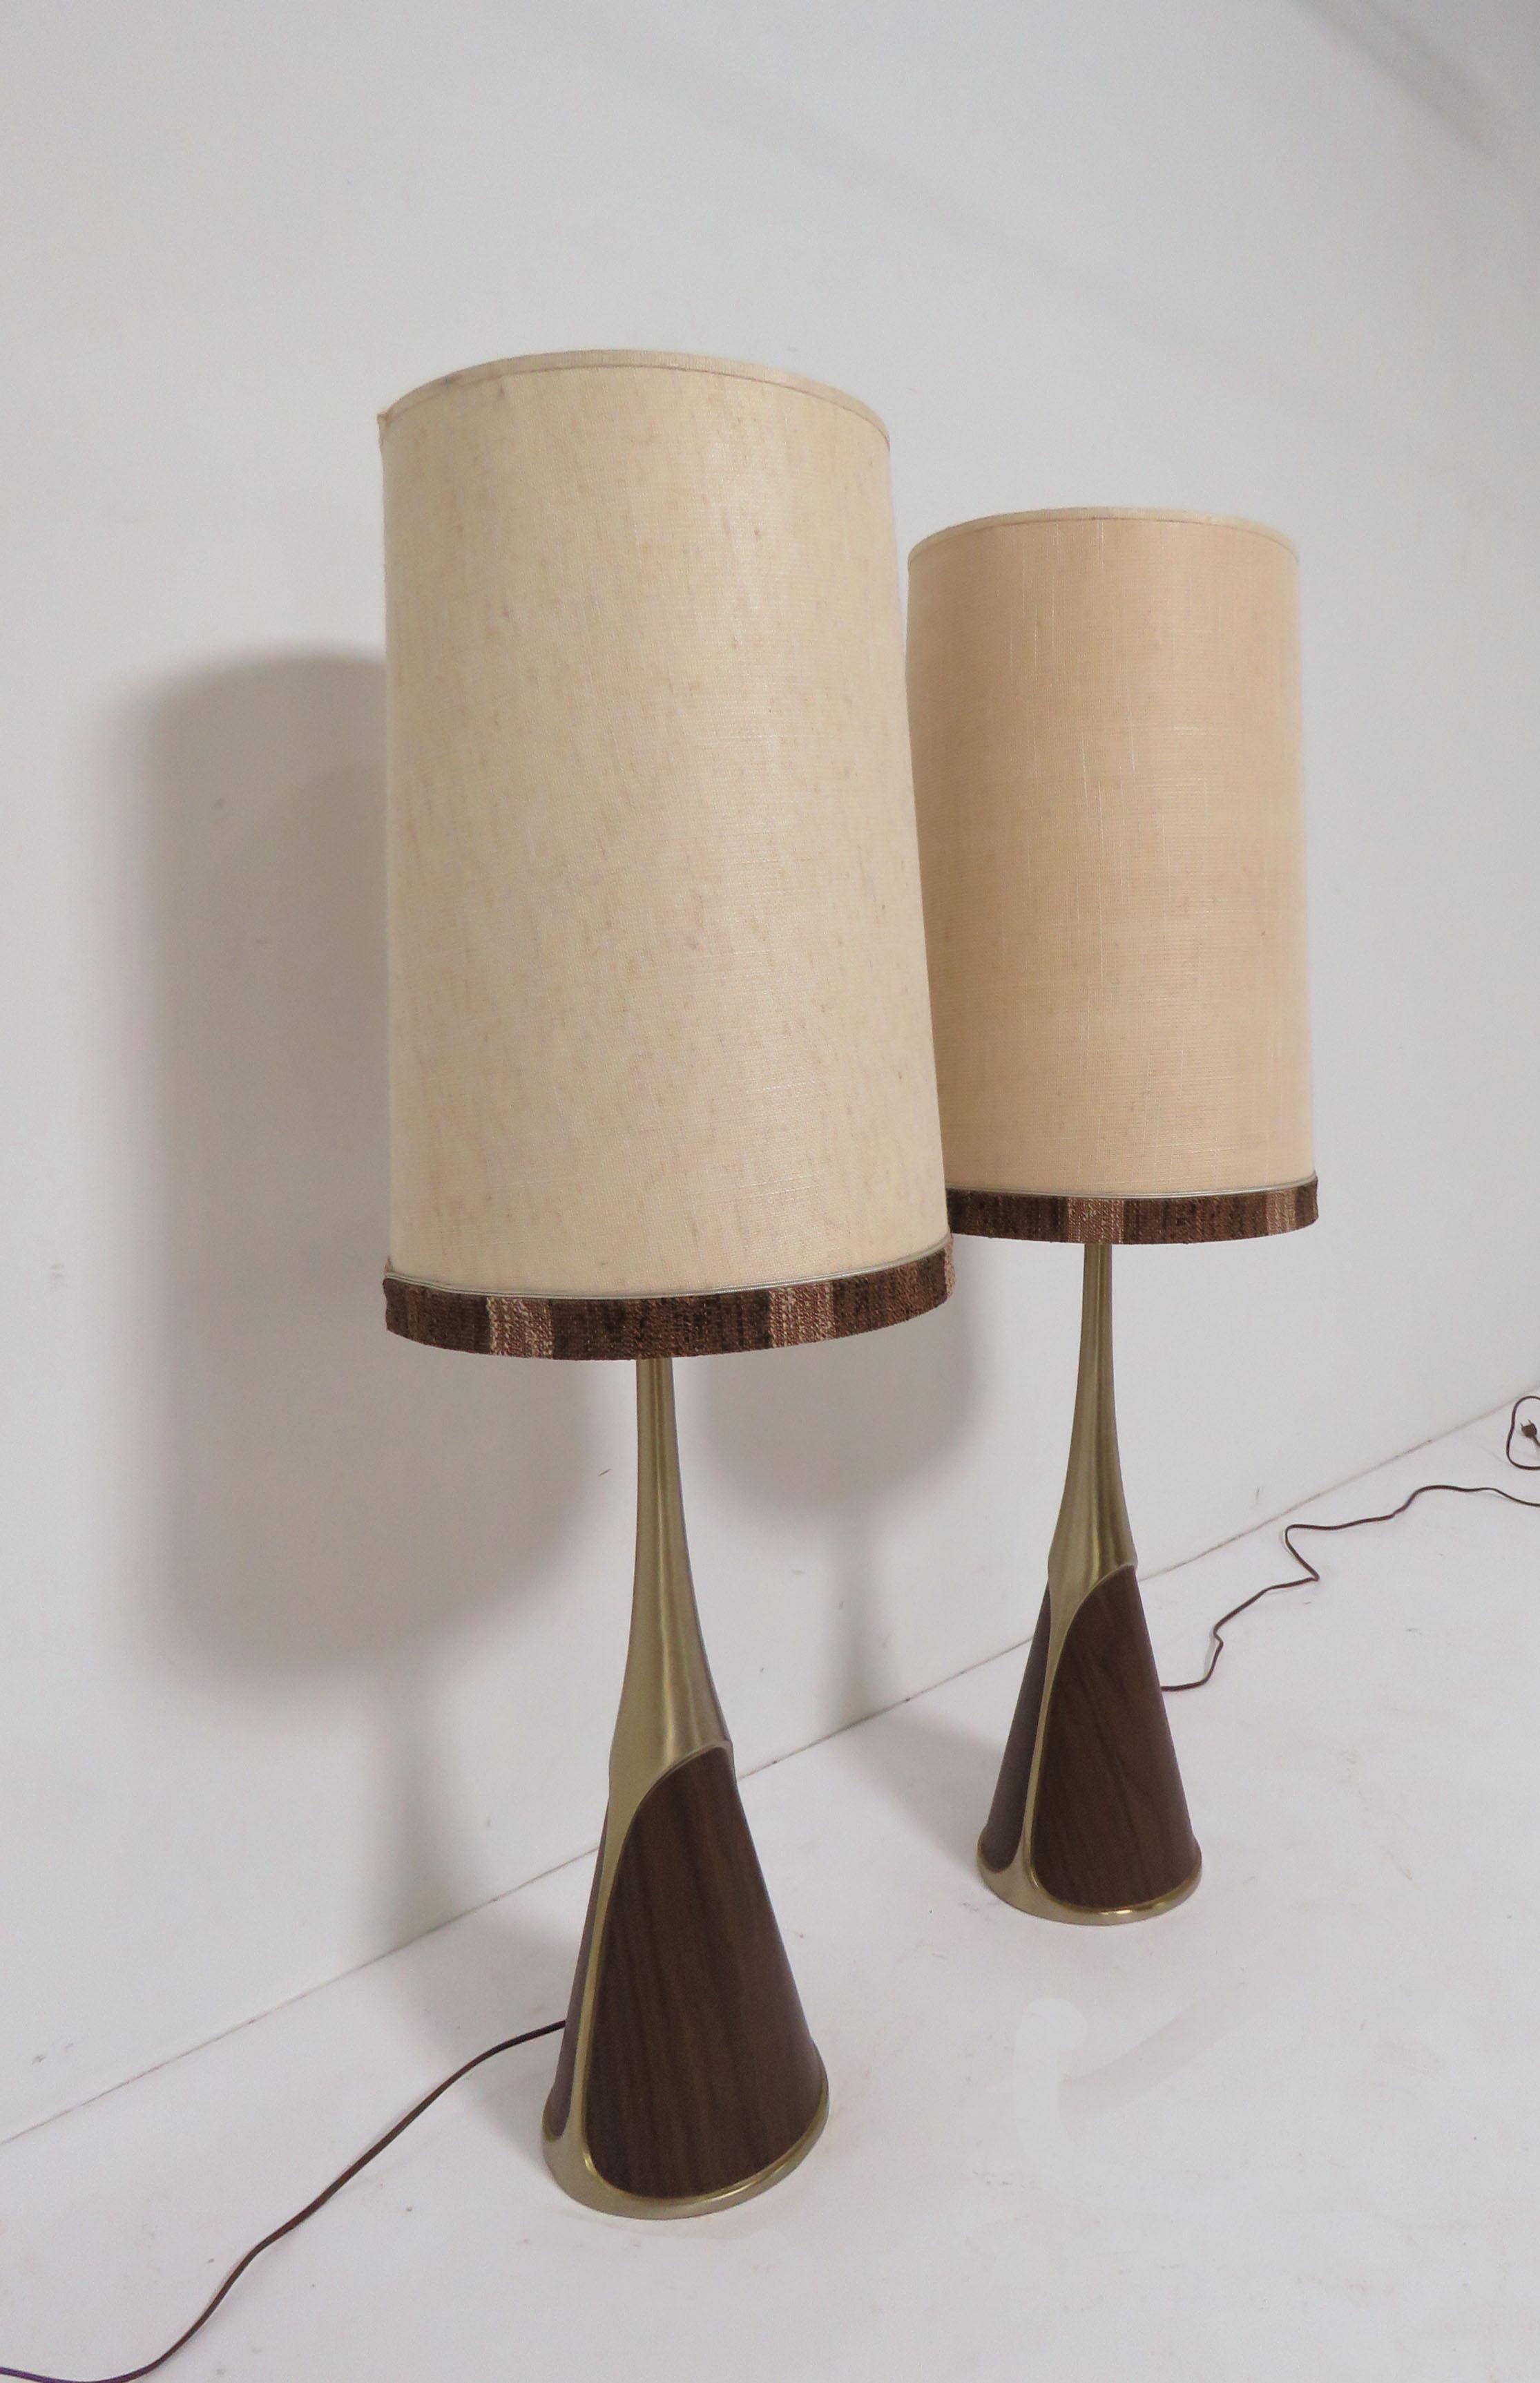 Mid-Century Modern Pair of Laurel Table Lamps with Teak Panels, circa 1960s